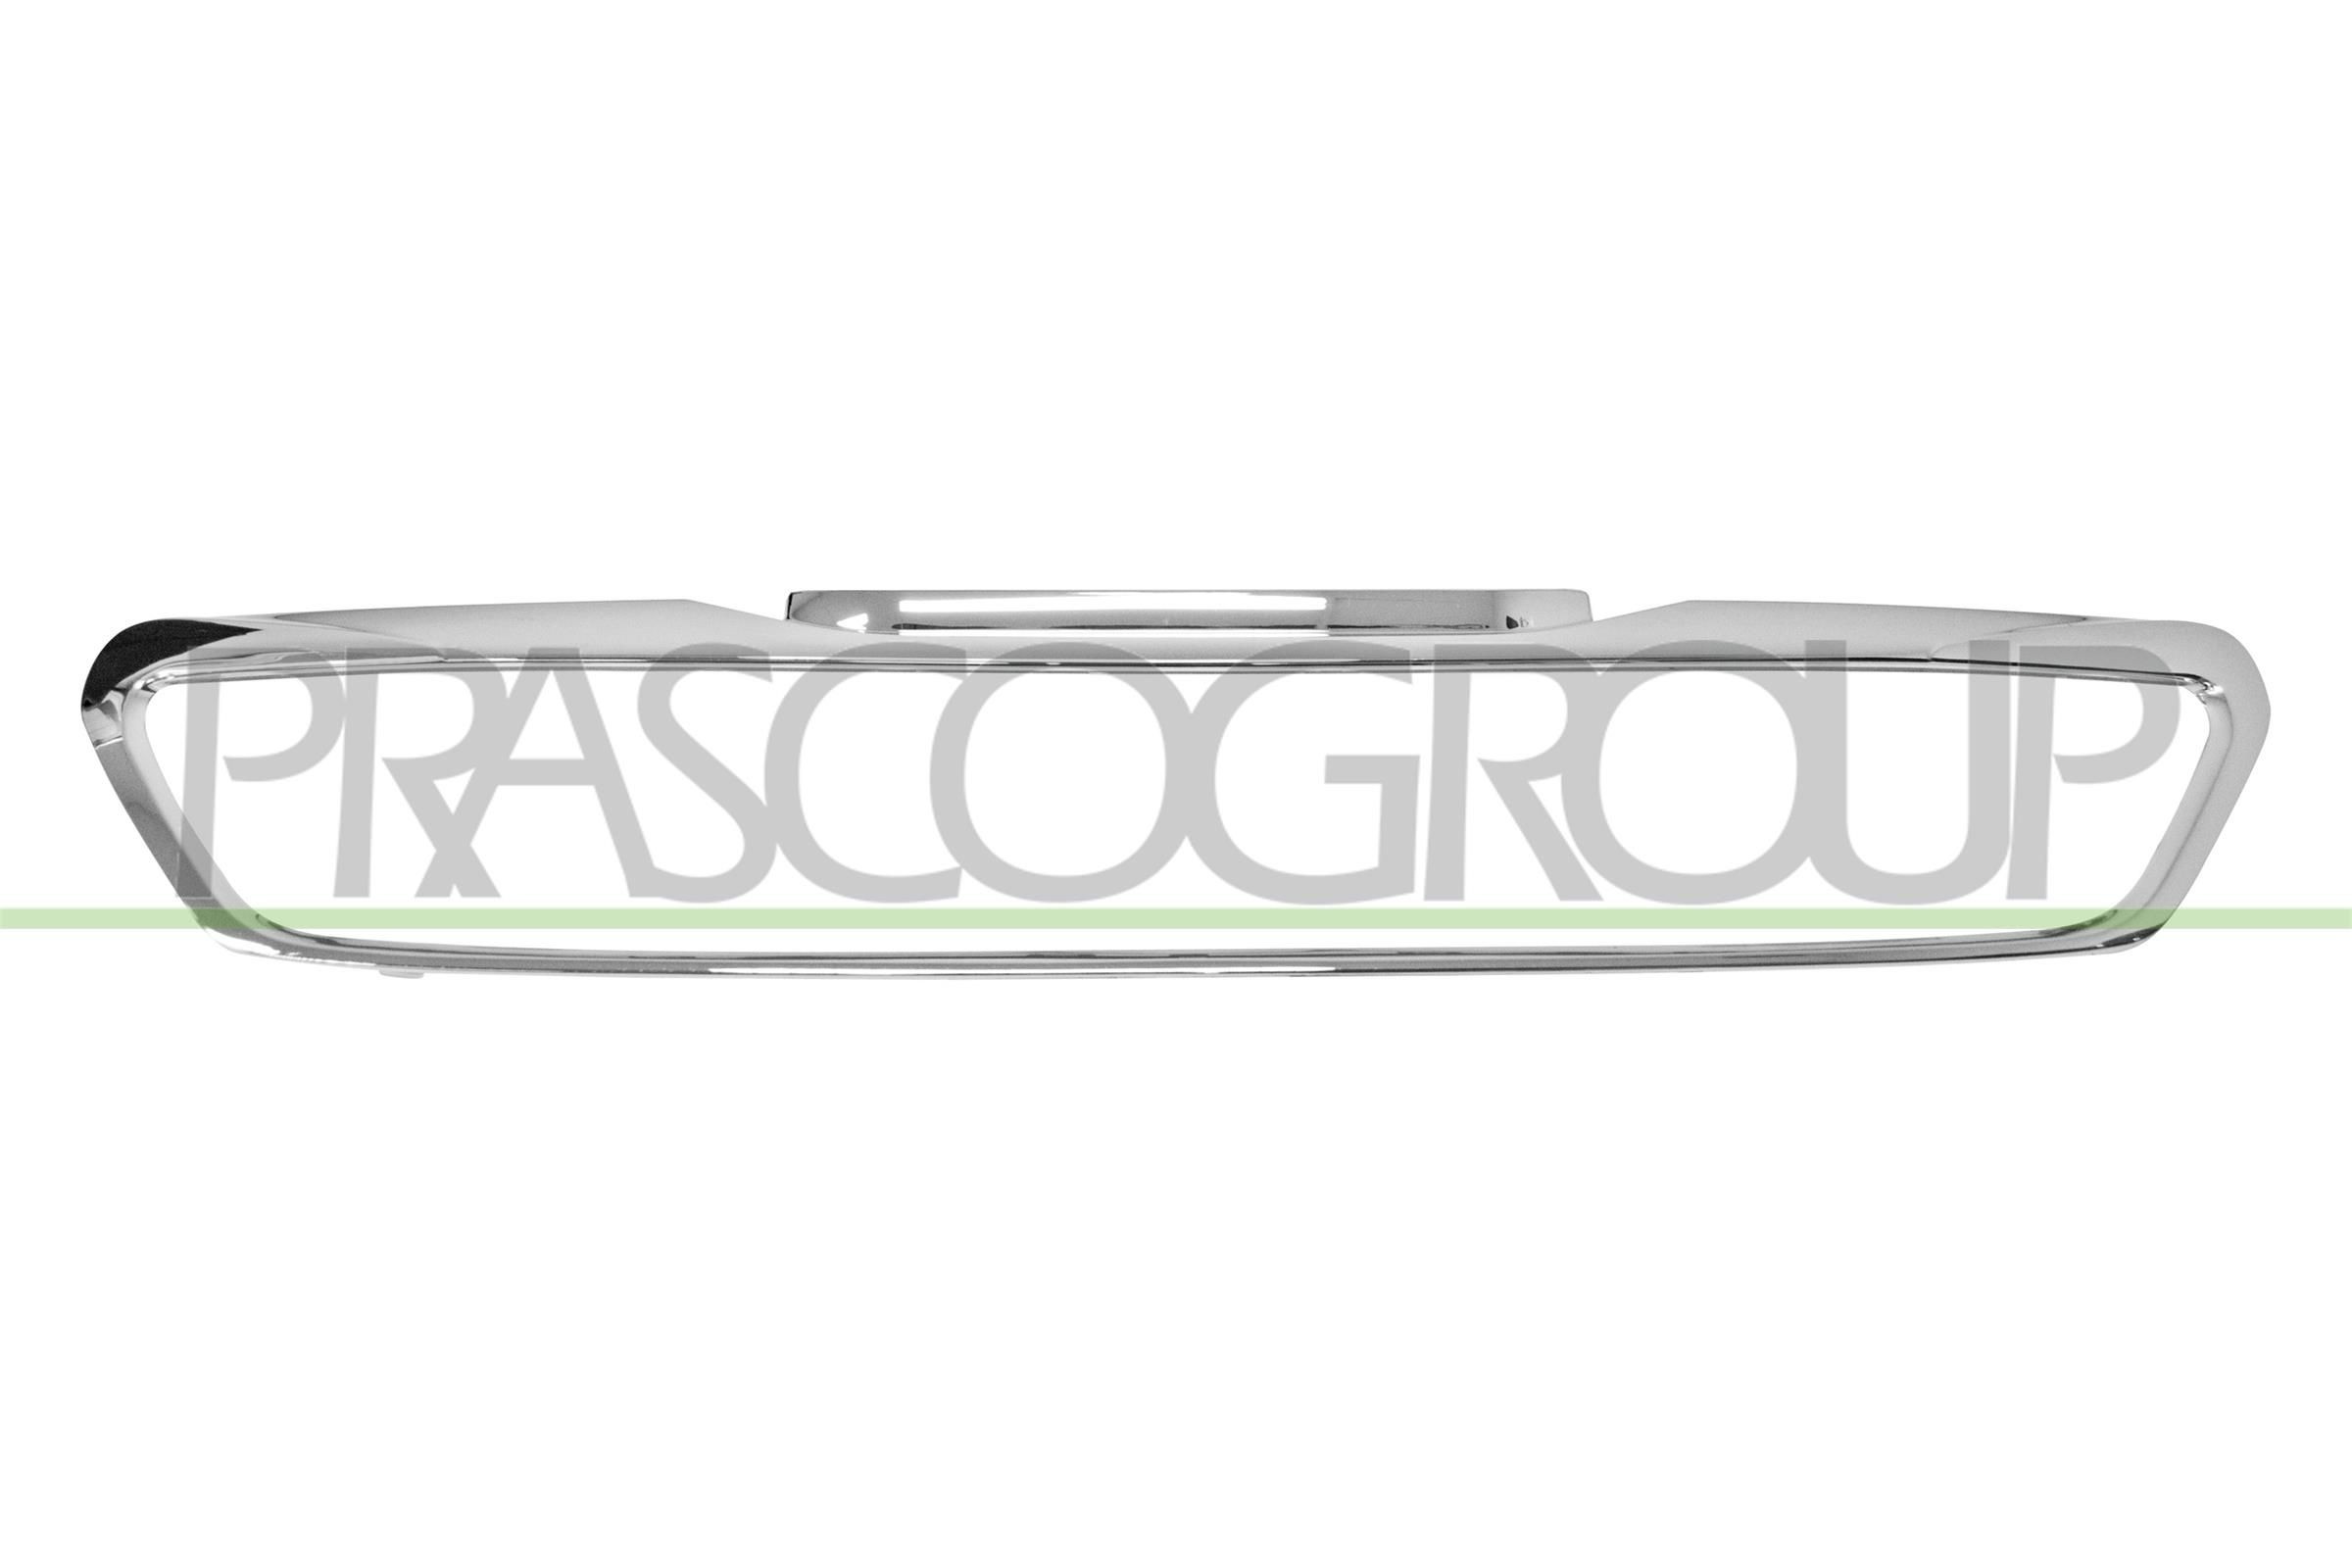 PRASCO PG4282216 PEUGEOT Grille assembly in original quality